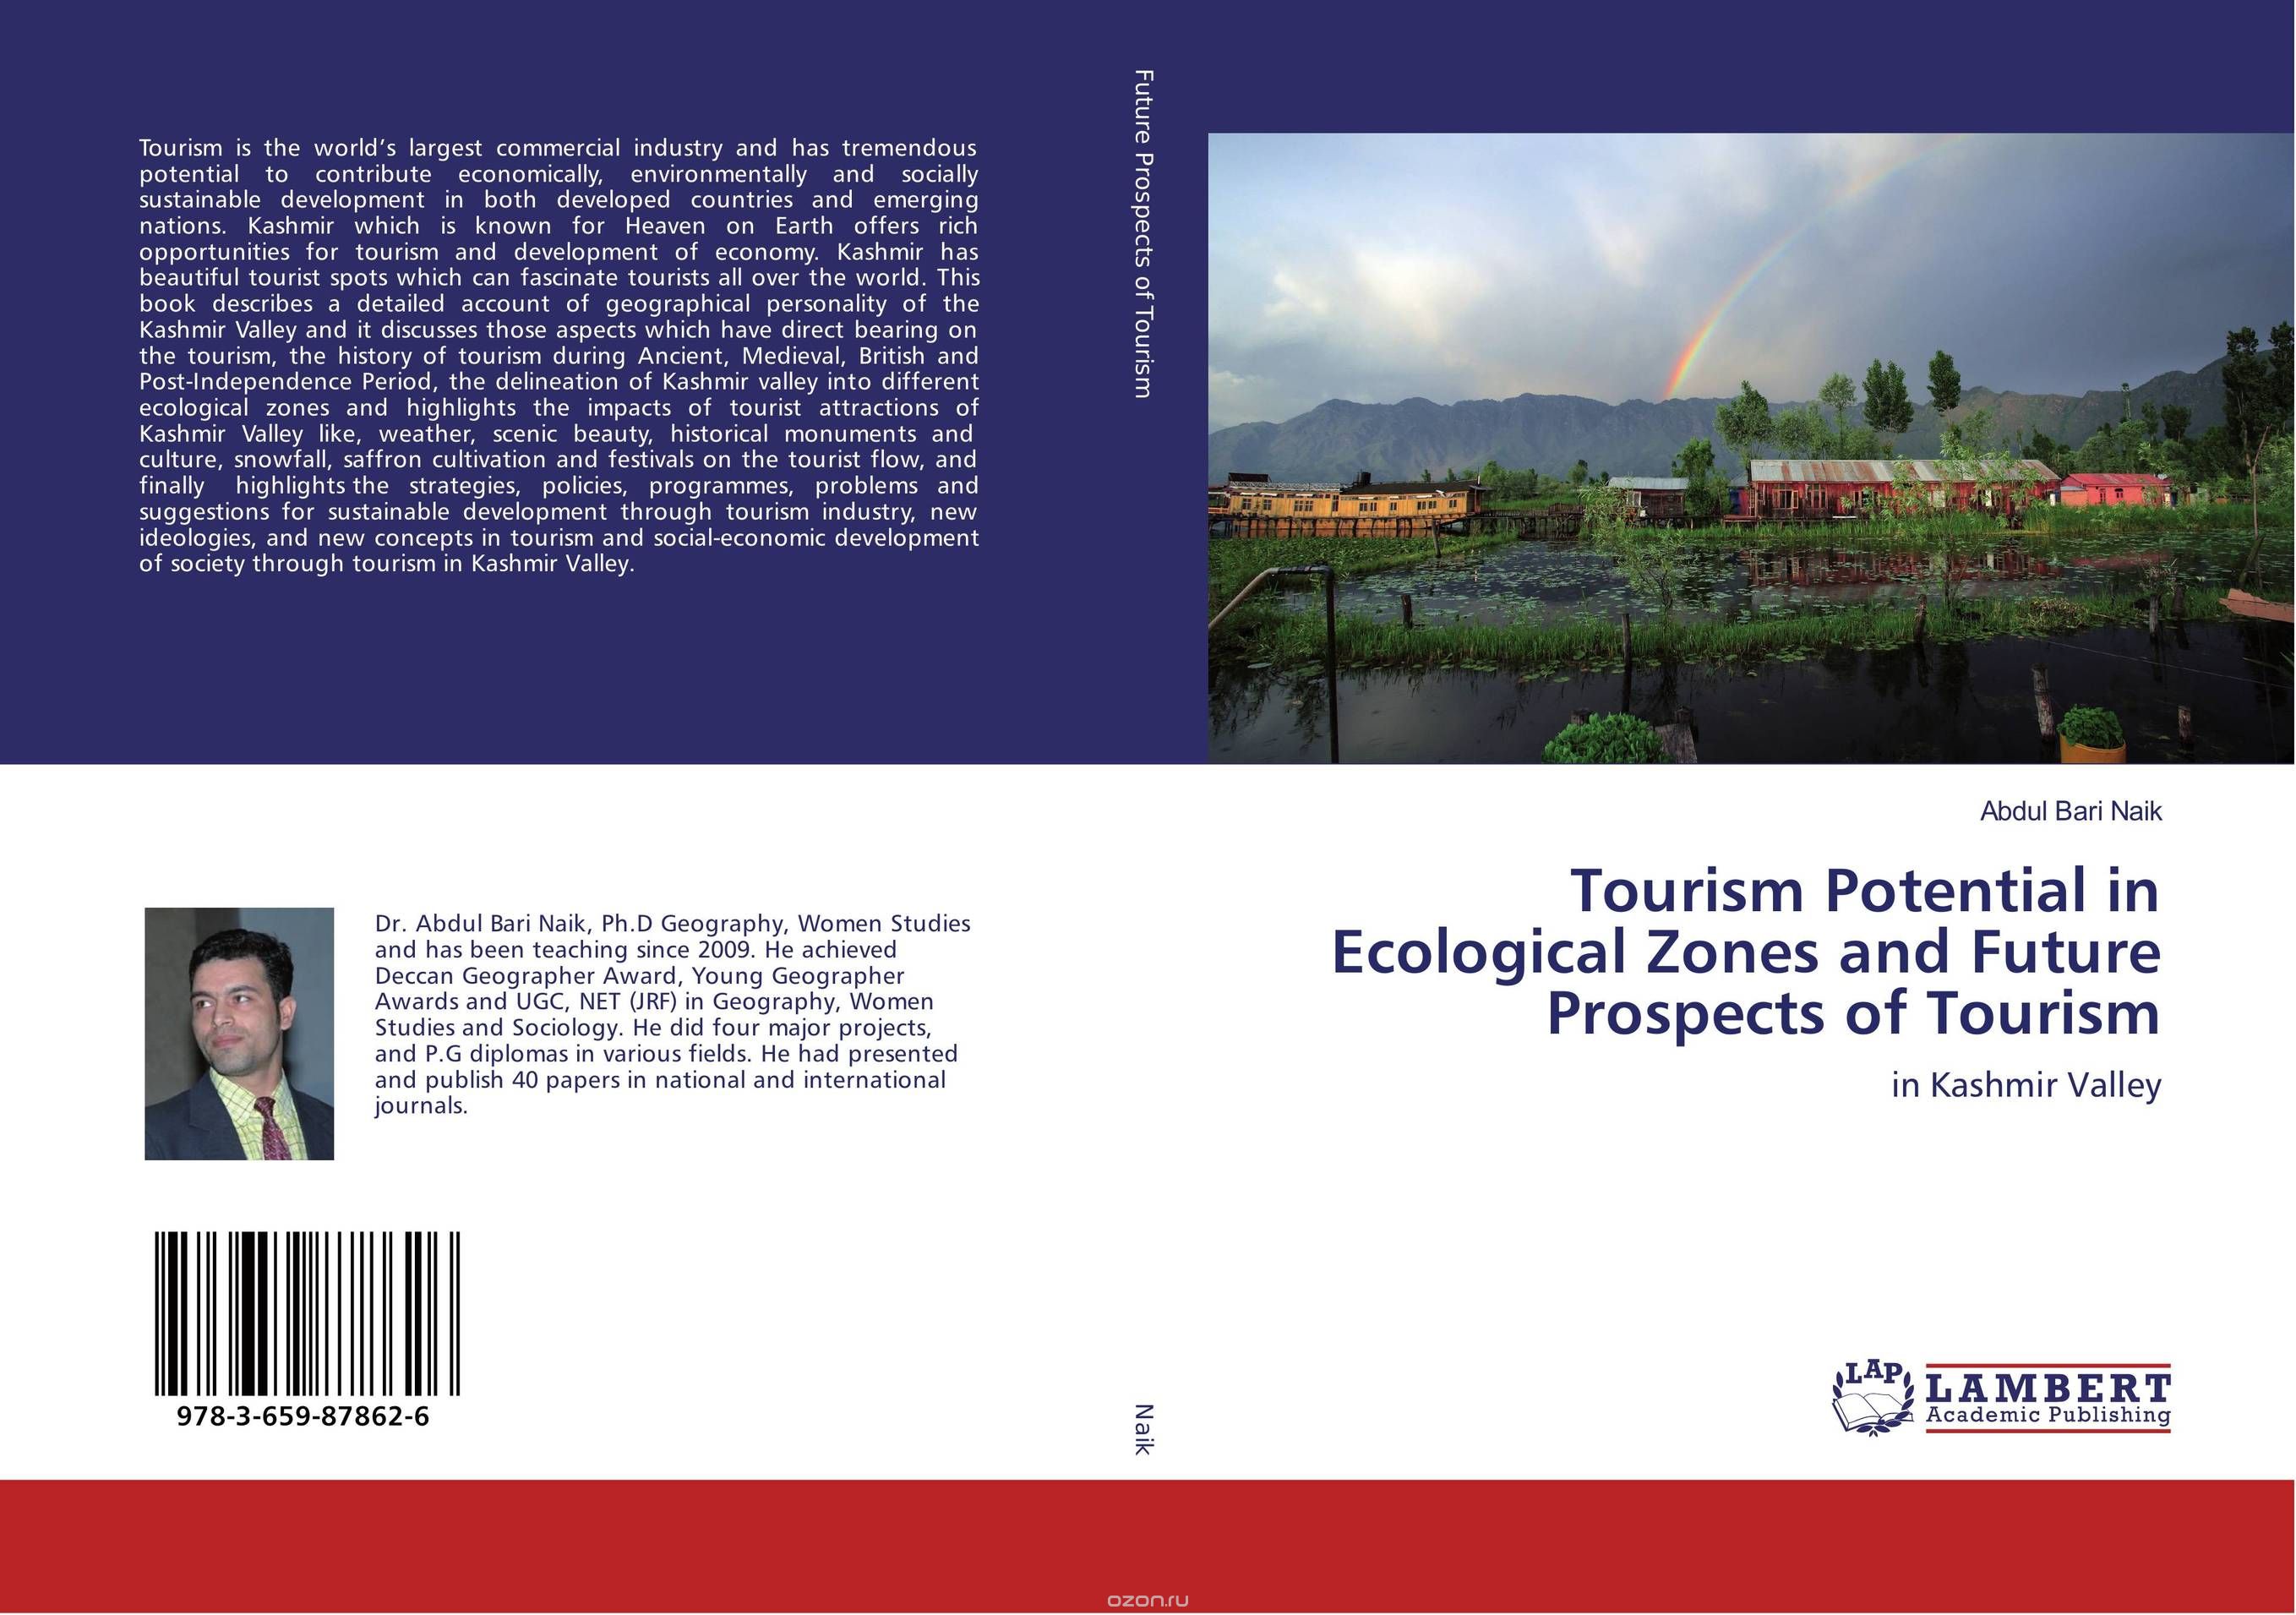 Скачать книгу "Tourism Potential in Ecological Zones and Future Prospects of Tourism"